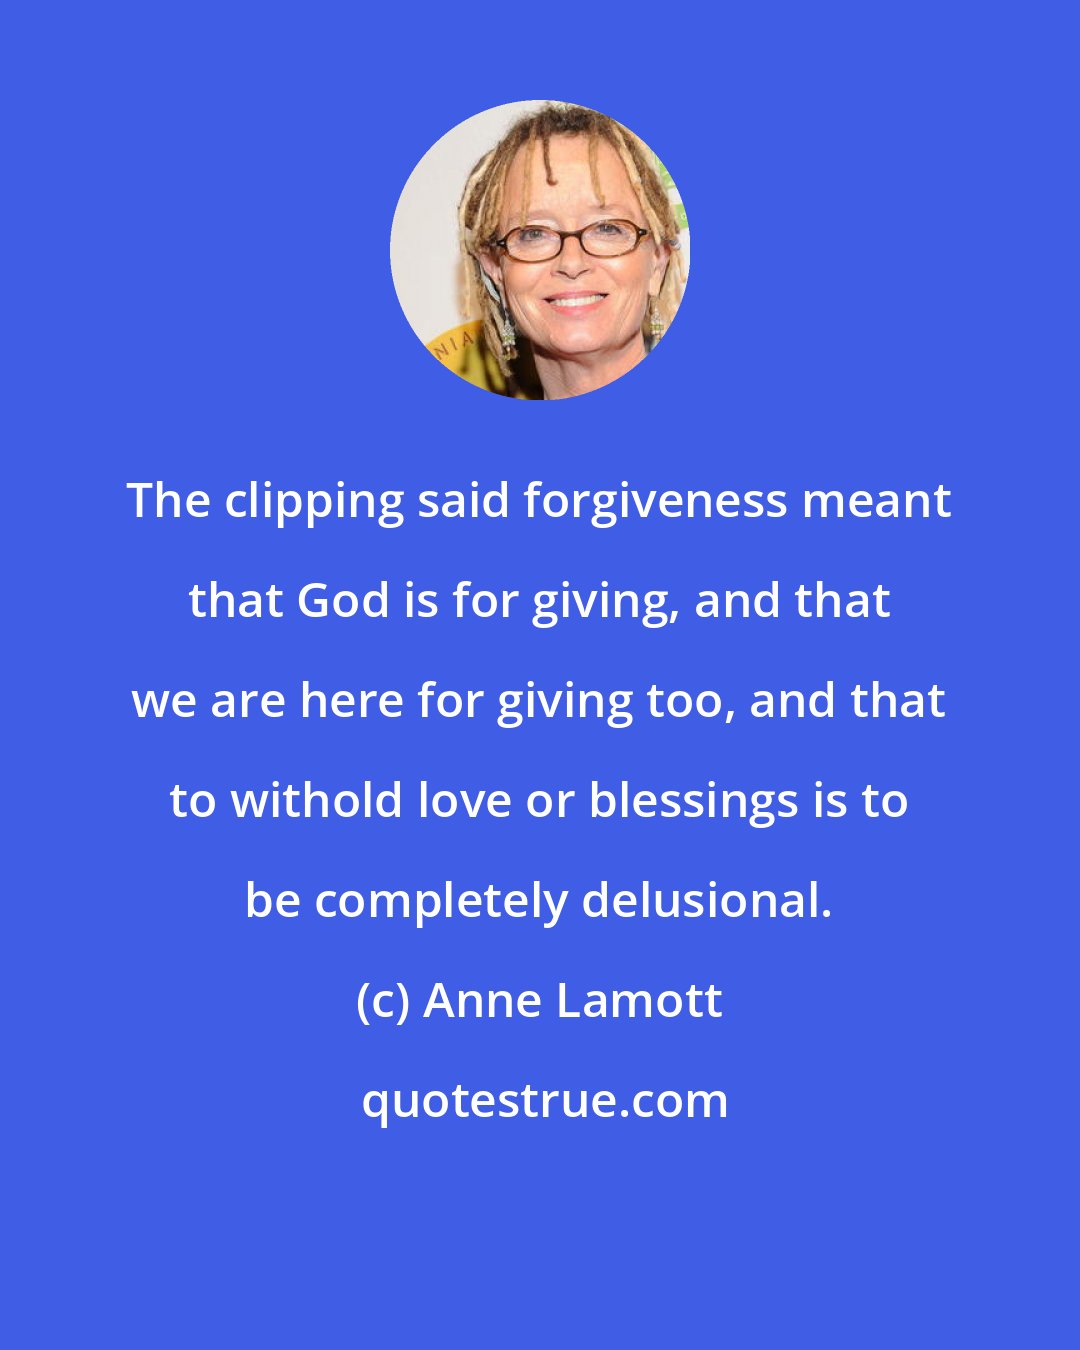 Anne Lamott: The clipping said forgiveness meant that God is for giving, and that we are here for giving too, and that to withold love or blessings is to be completely delusional.